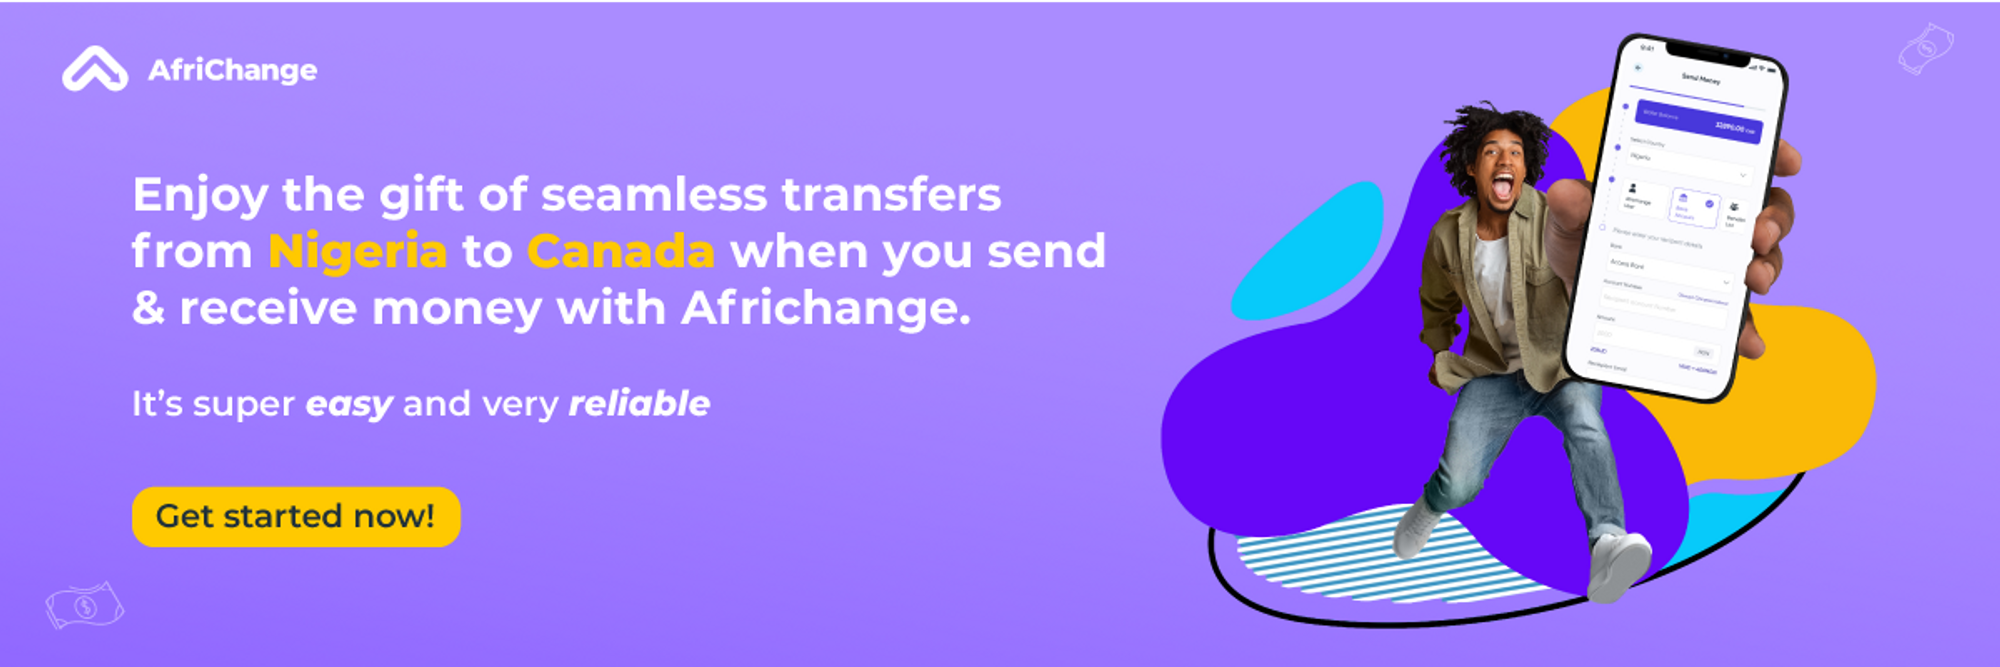 Enjoy seamless Money Transfers from Nigeria to Canada with Africhange